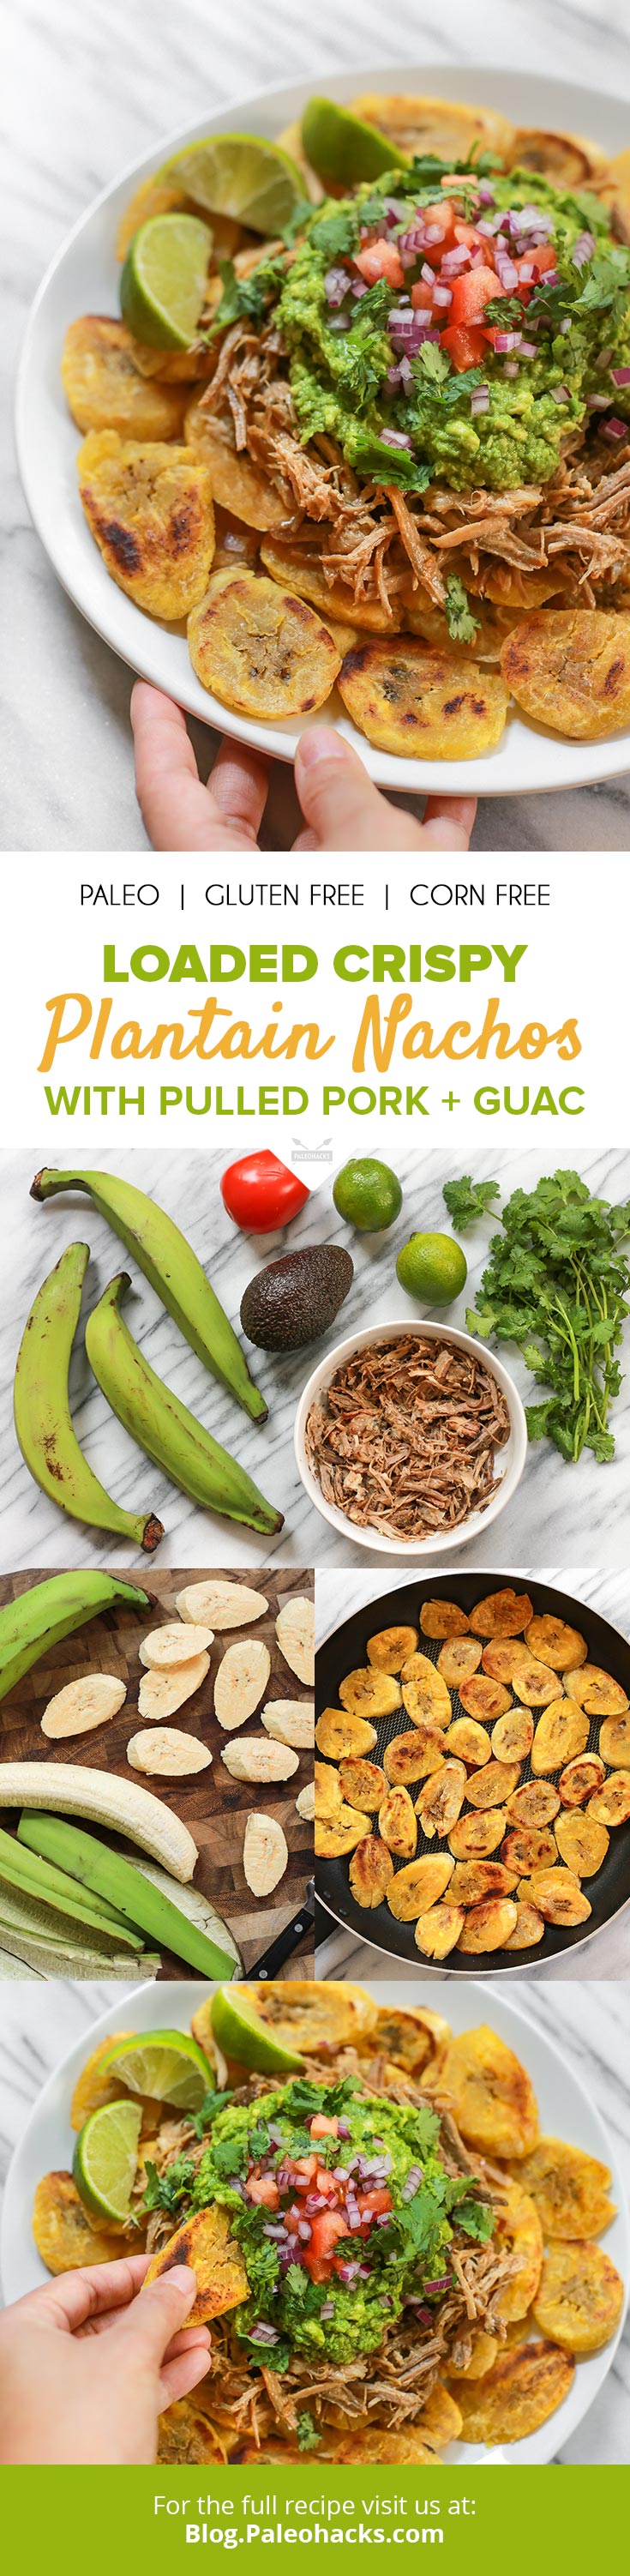 For a Paleo twist on nachos, dig into these crispy plantain slices topped with pulled pork and guacamole.